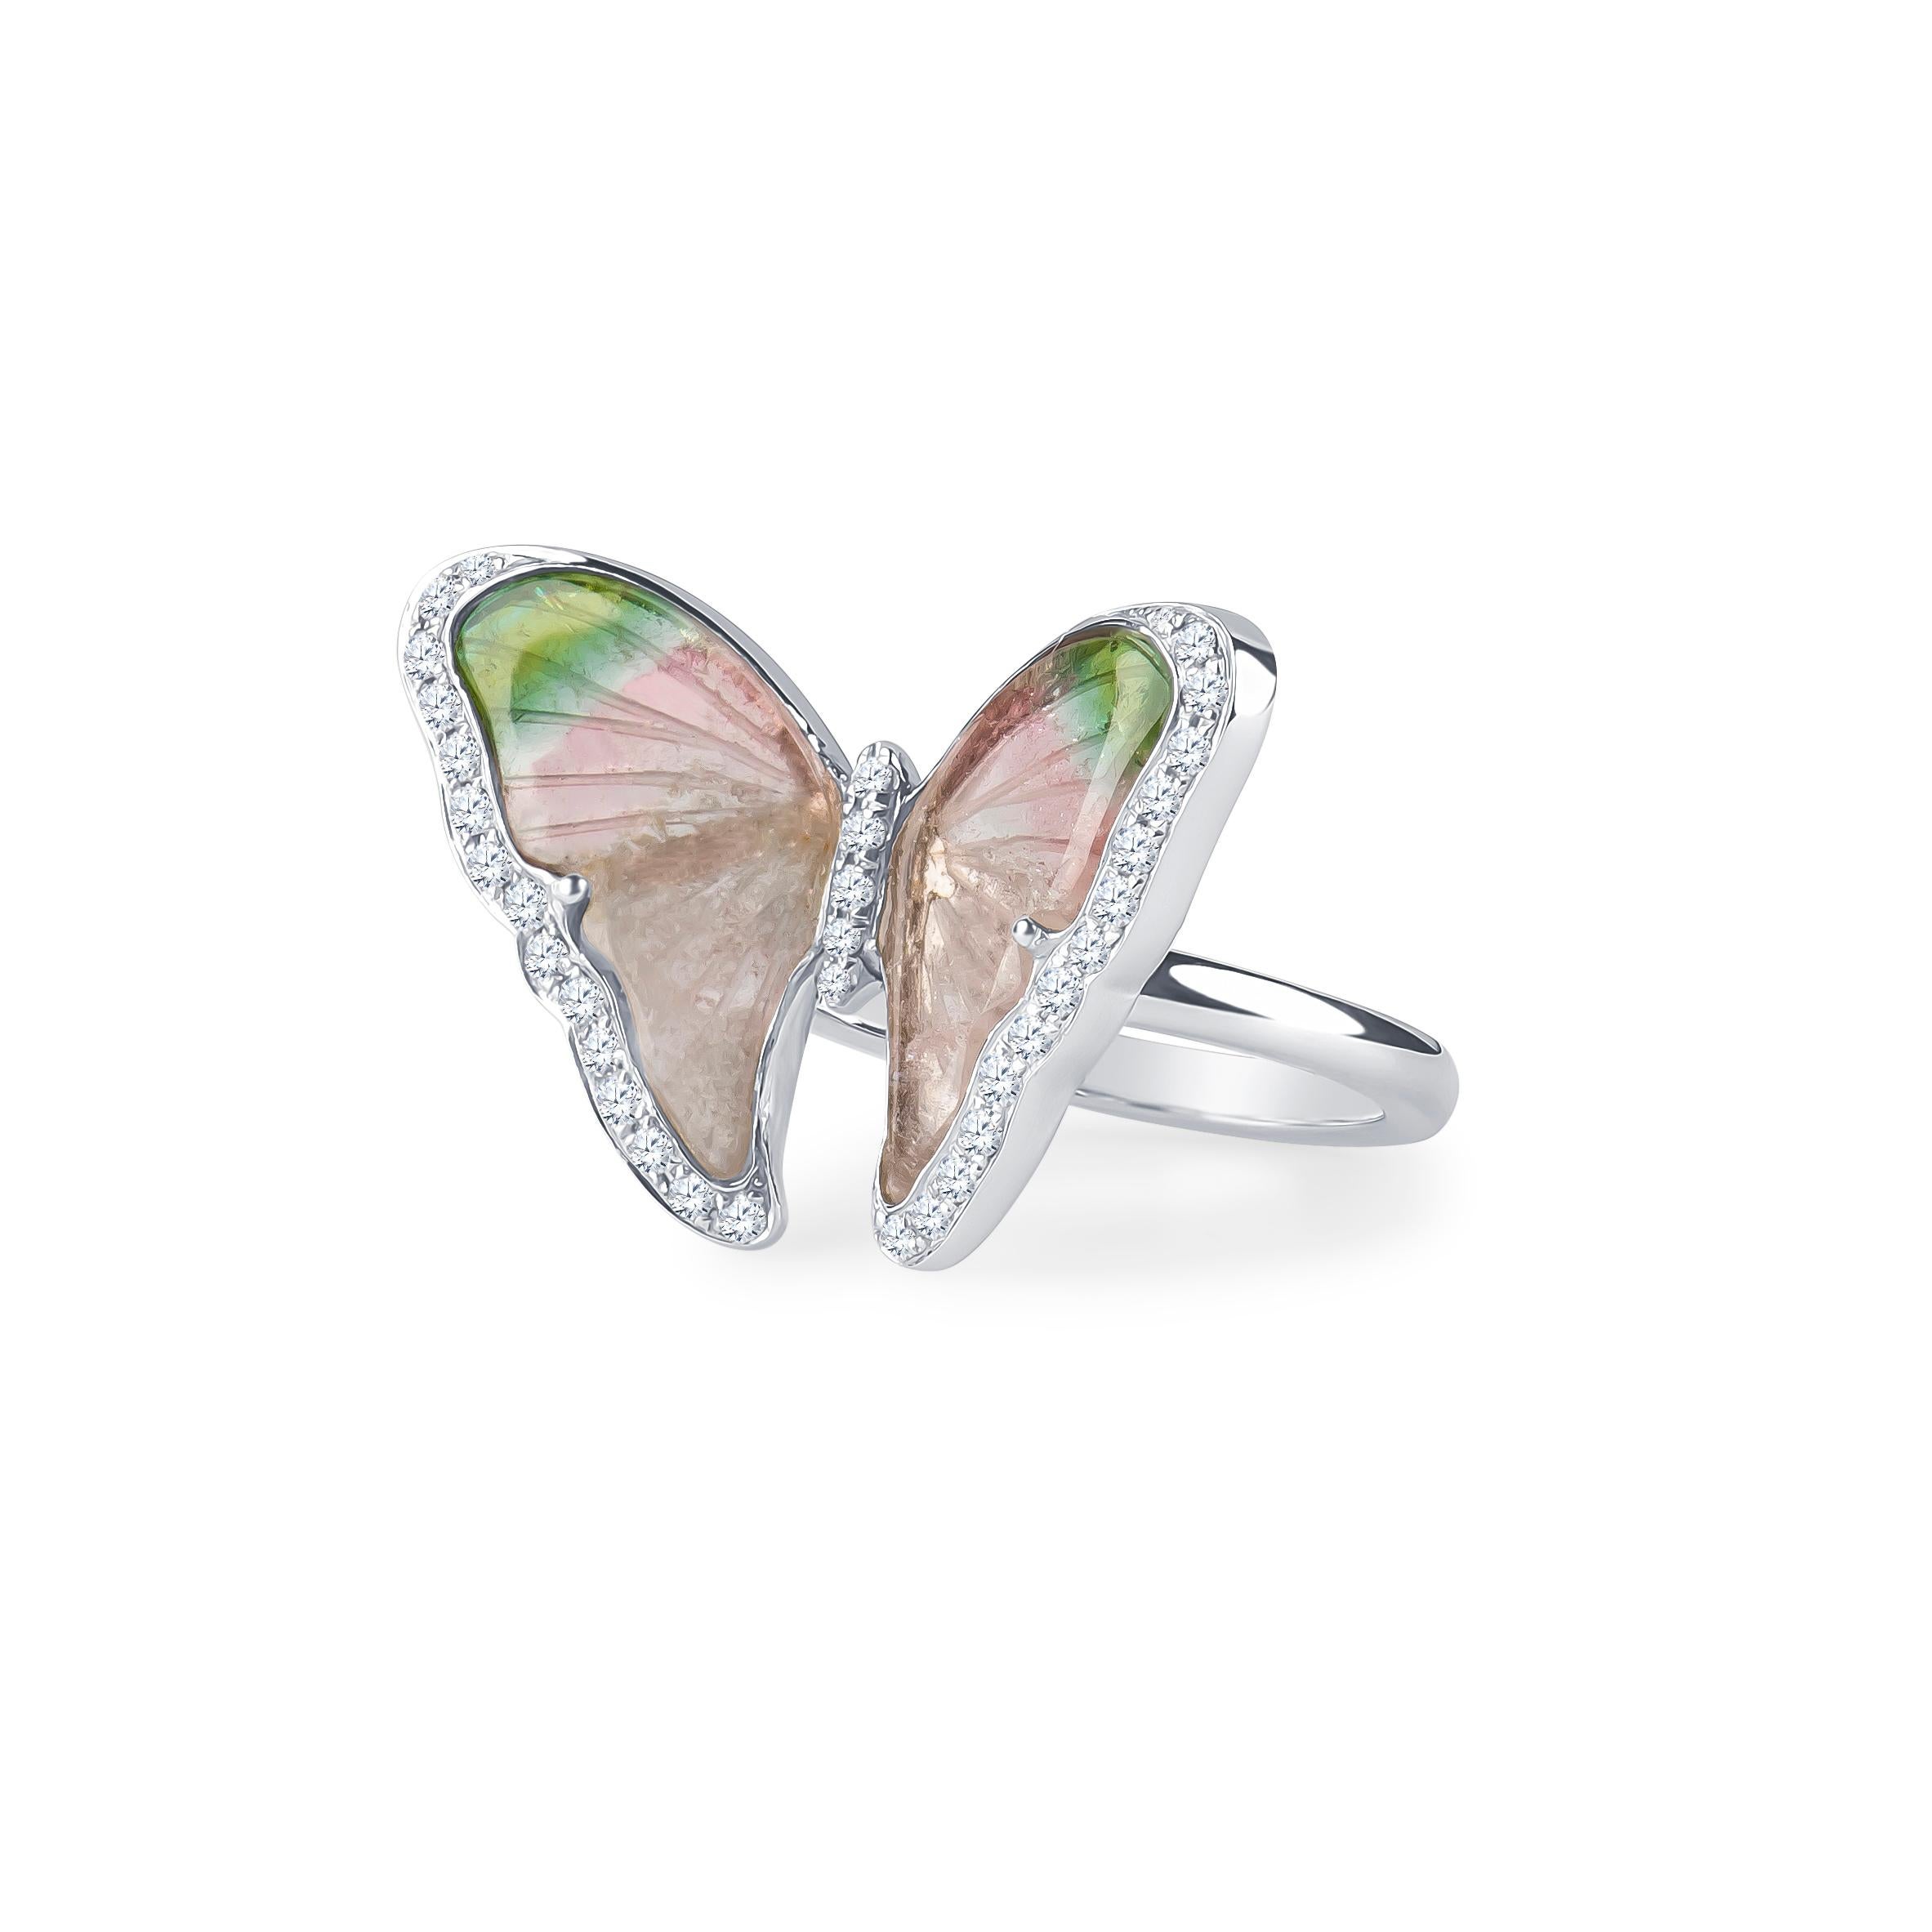 Natural tourmaline butterfly ring with 0.25 carat total weight in round brilliant cut natural diamond accents set in 18K white gold. Size 6 & may be resized to larger or smaller upon request. 